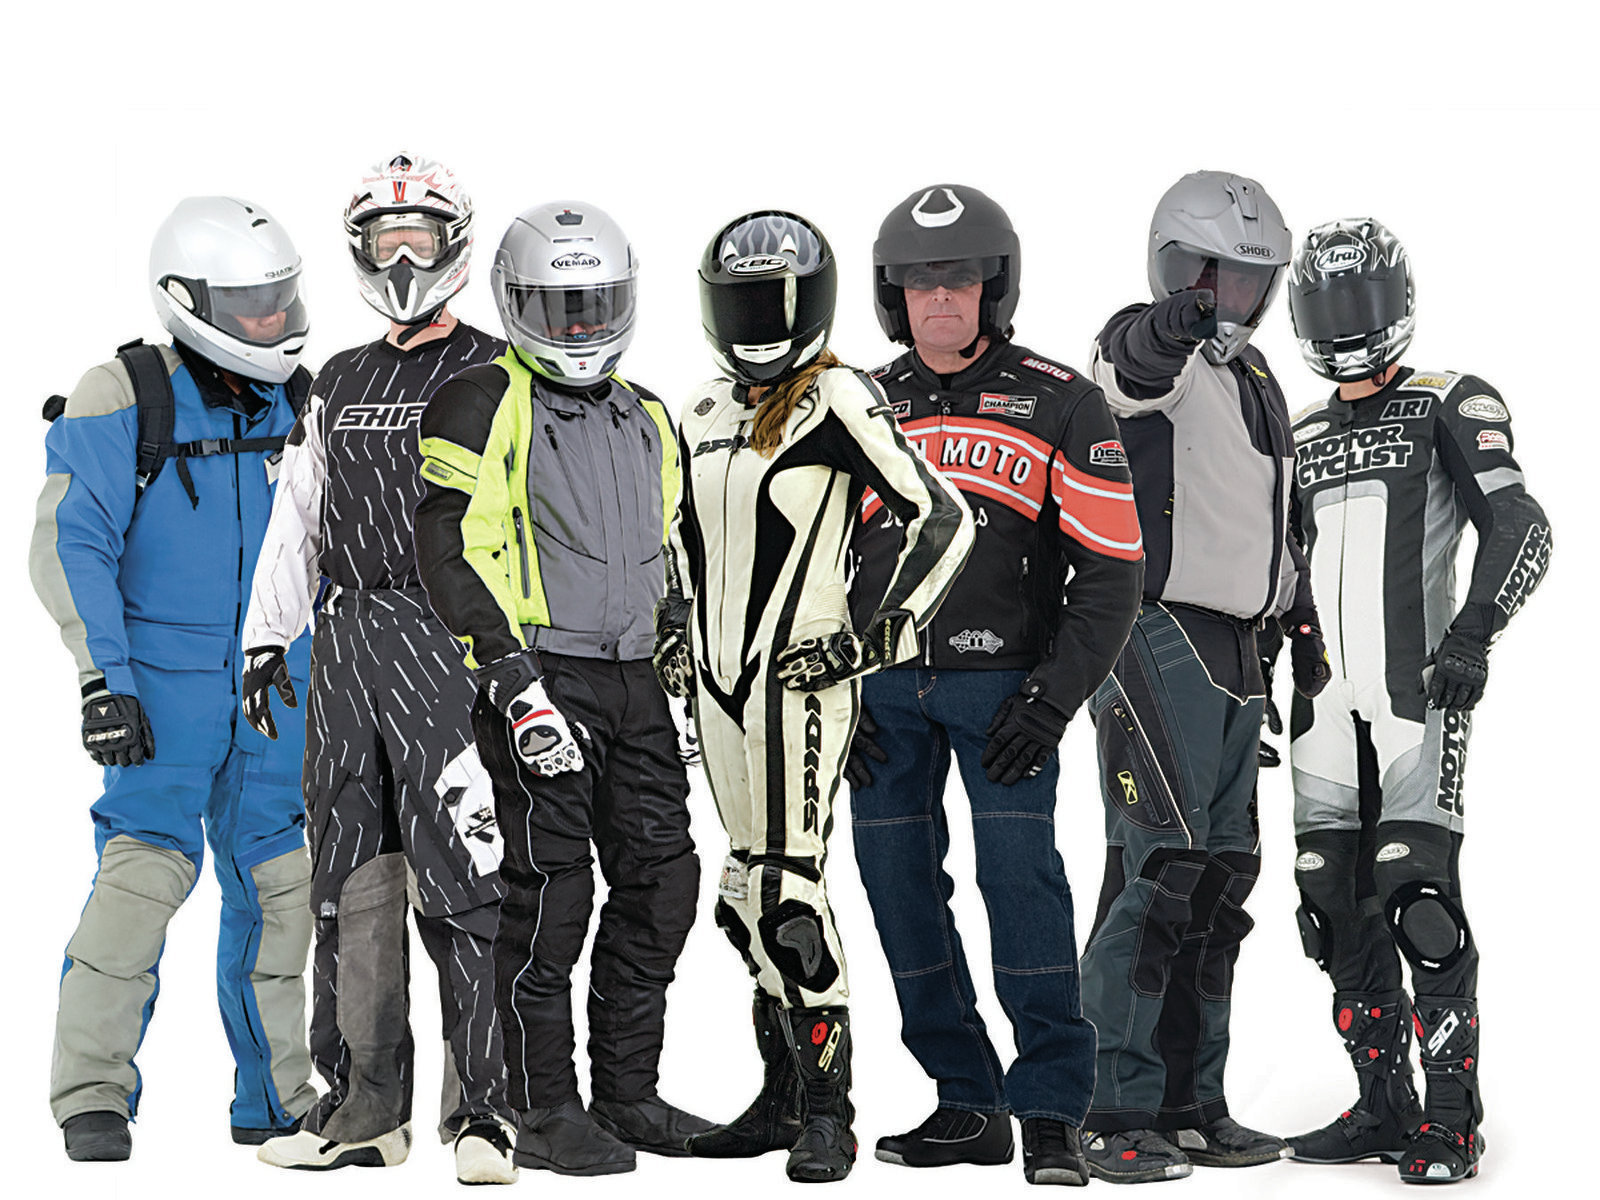 Riding Gear, Function, Then Fashion